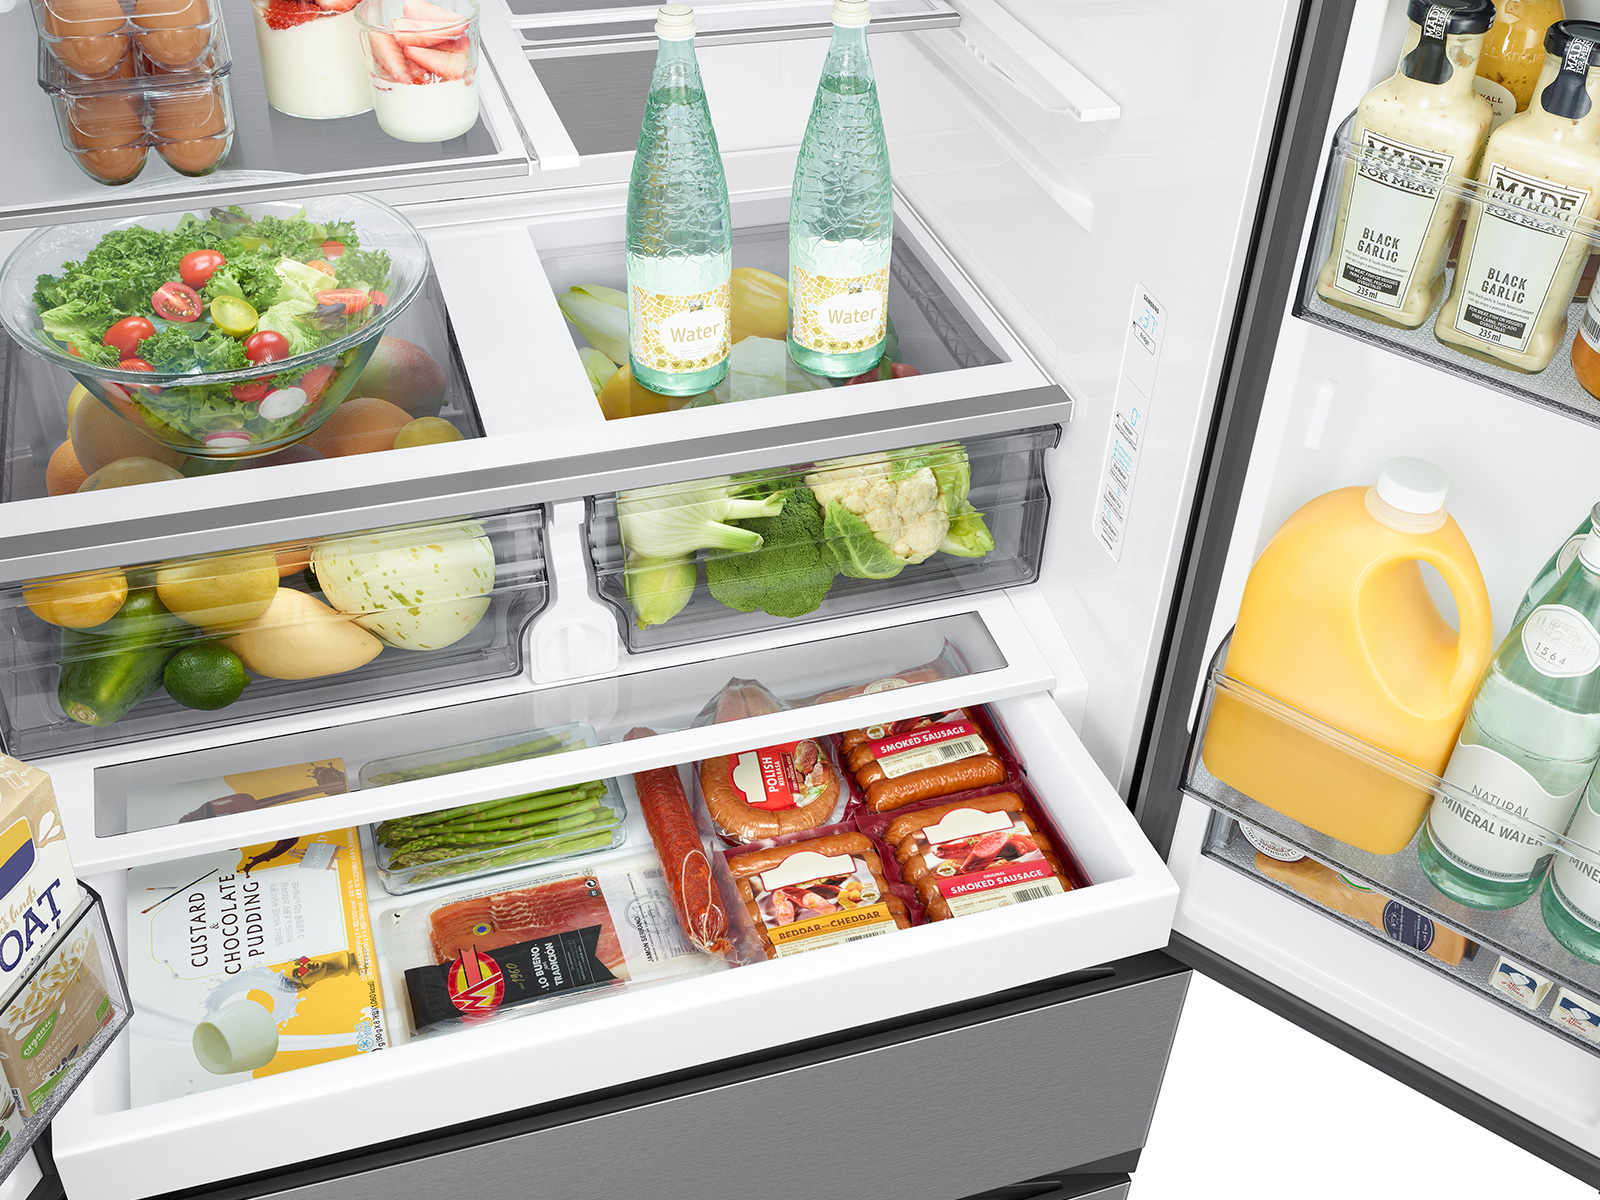 Thumbnail image of 30 cu. ft. Mega Capacity 4-Door French Door Refrigerator with Four Types of Ice in Stainless Steel